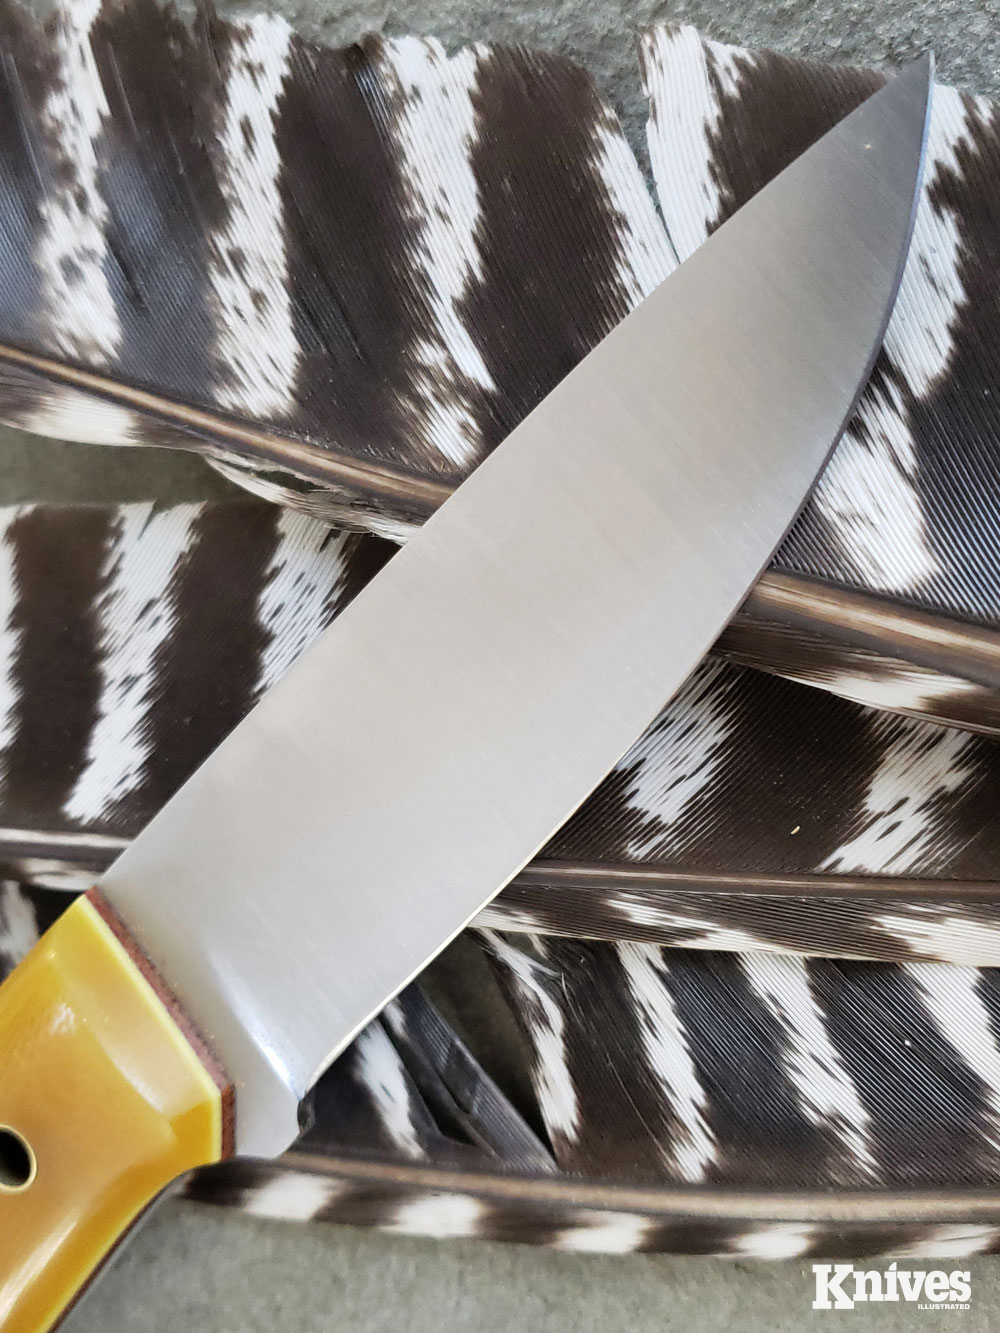 The Layman blade features a full-height grind, making it an excellent slicer.